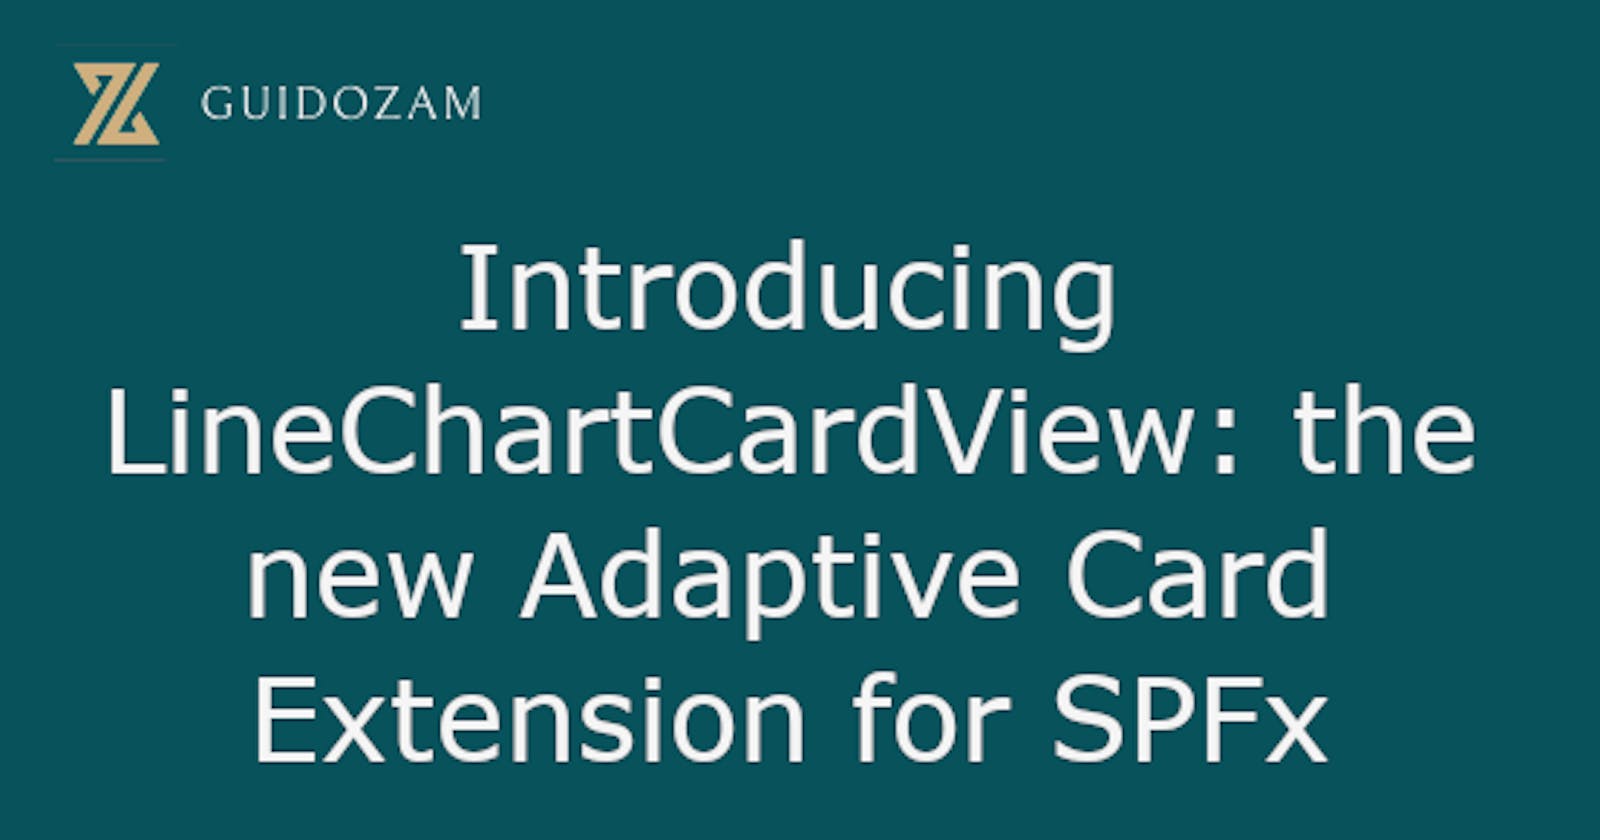 Introducing LineChartCardView: the new Adaptive Card Extension for SPFx